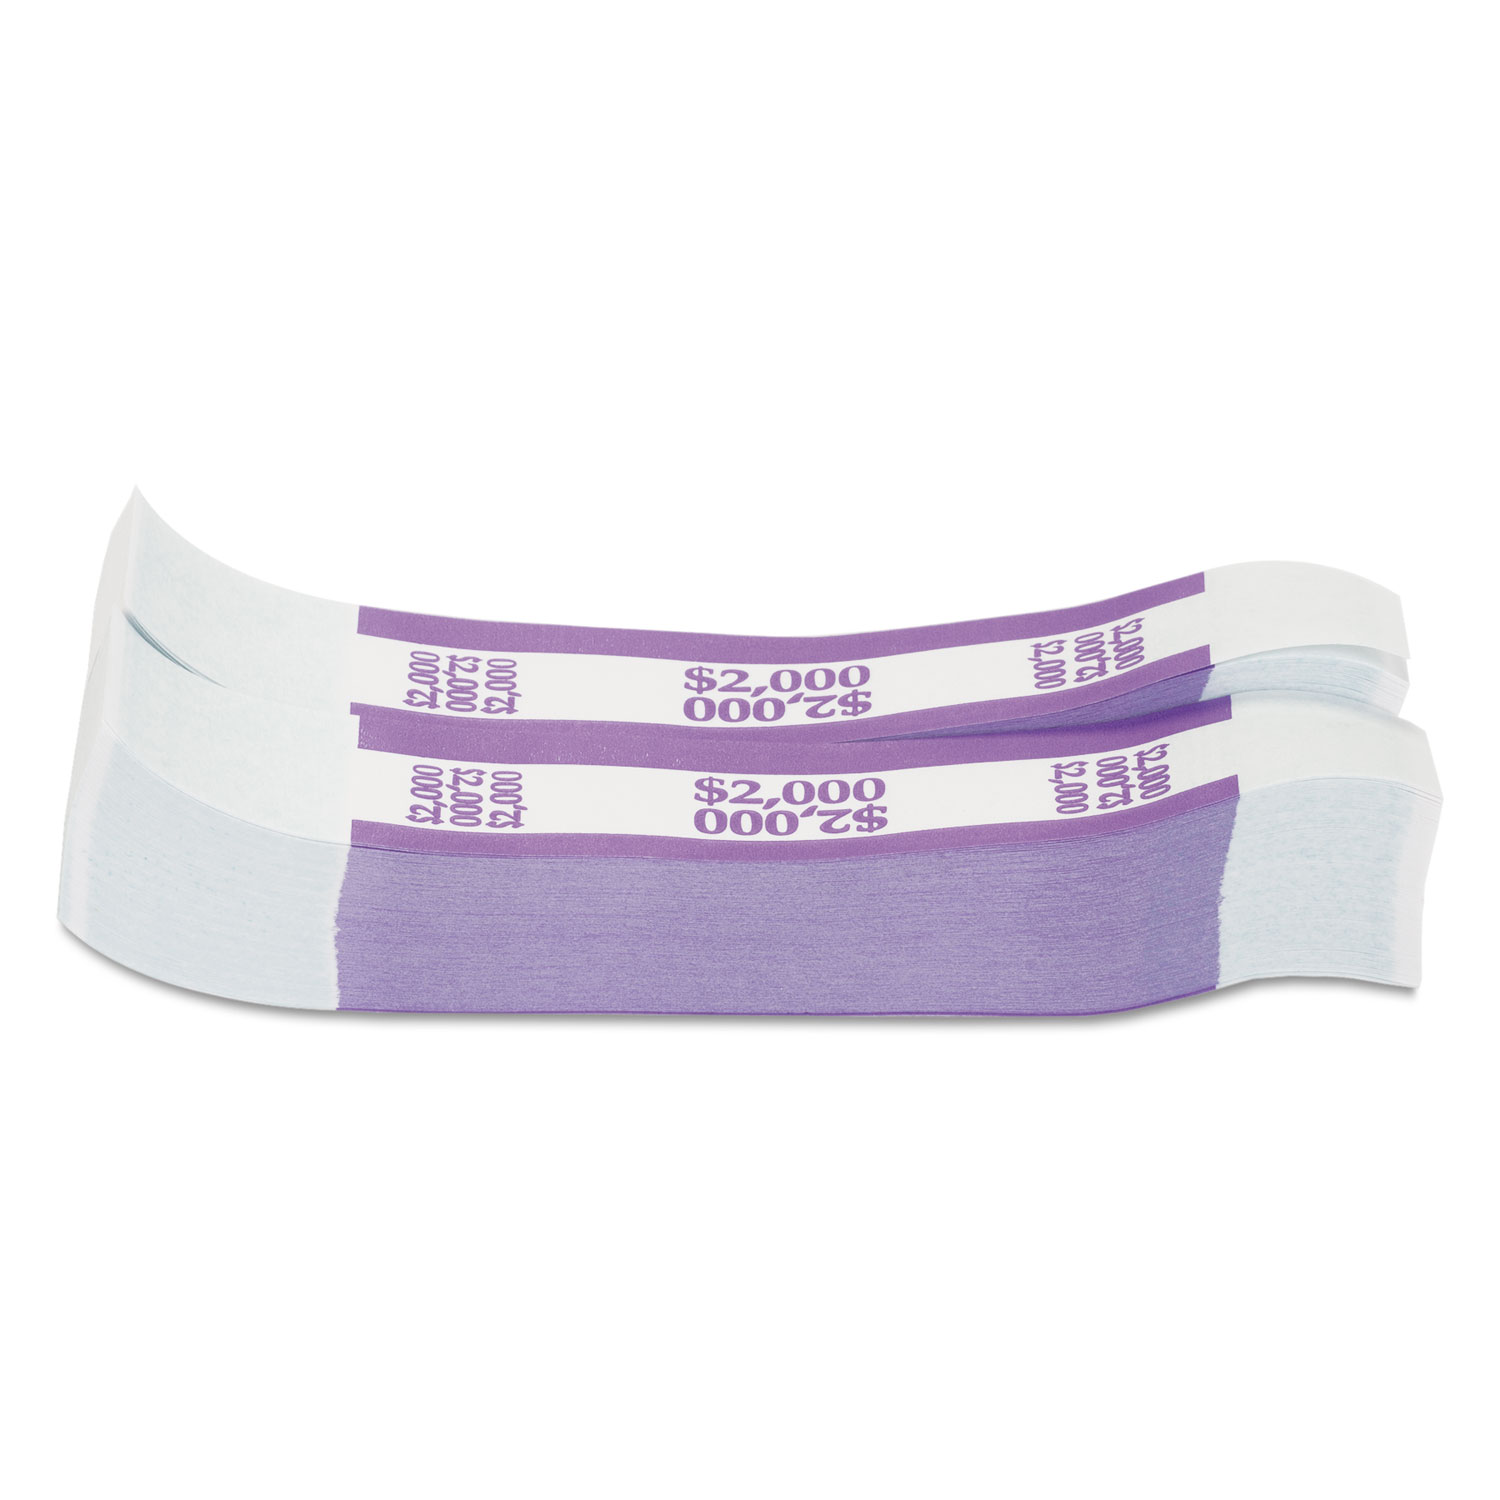  Pap-R Products 216070H19 Currency Straps, Violet, $2,000 in $20 Bills, 1000 Bands/Pack (CTX402000) 